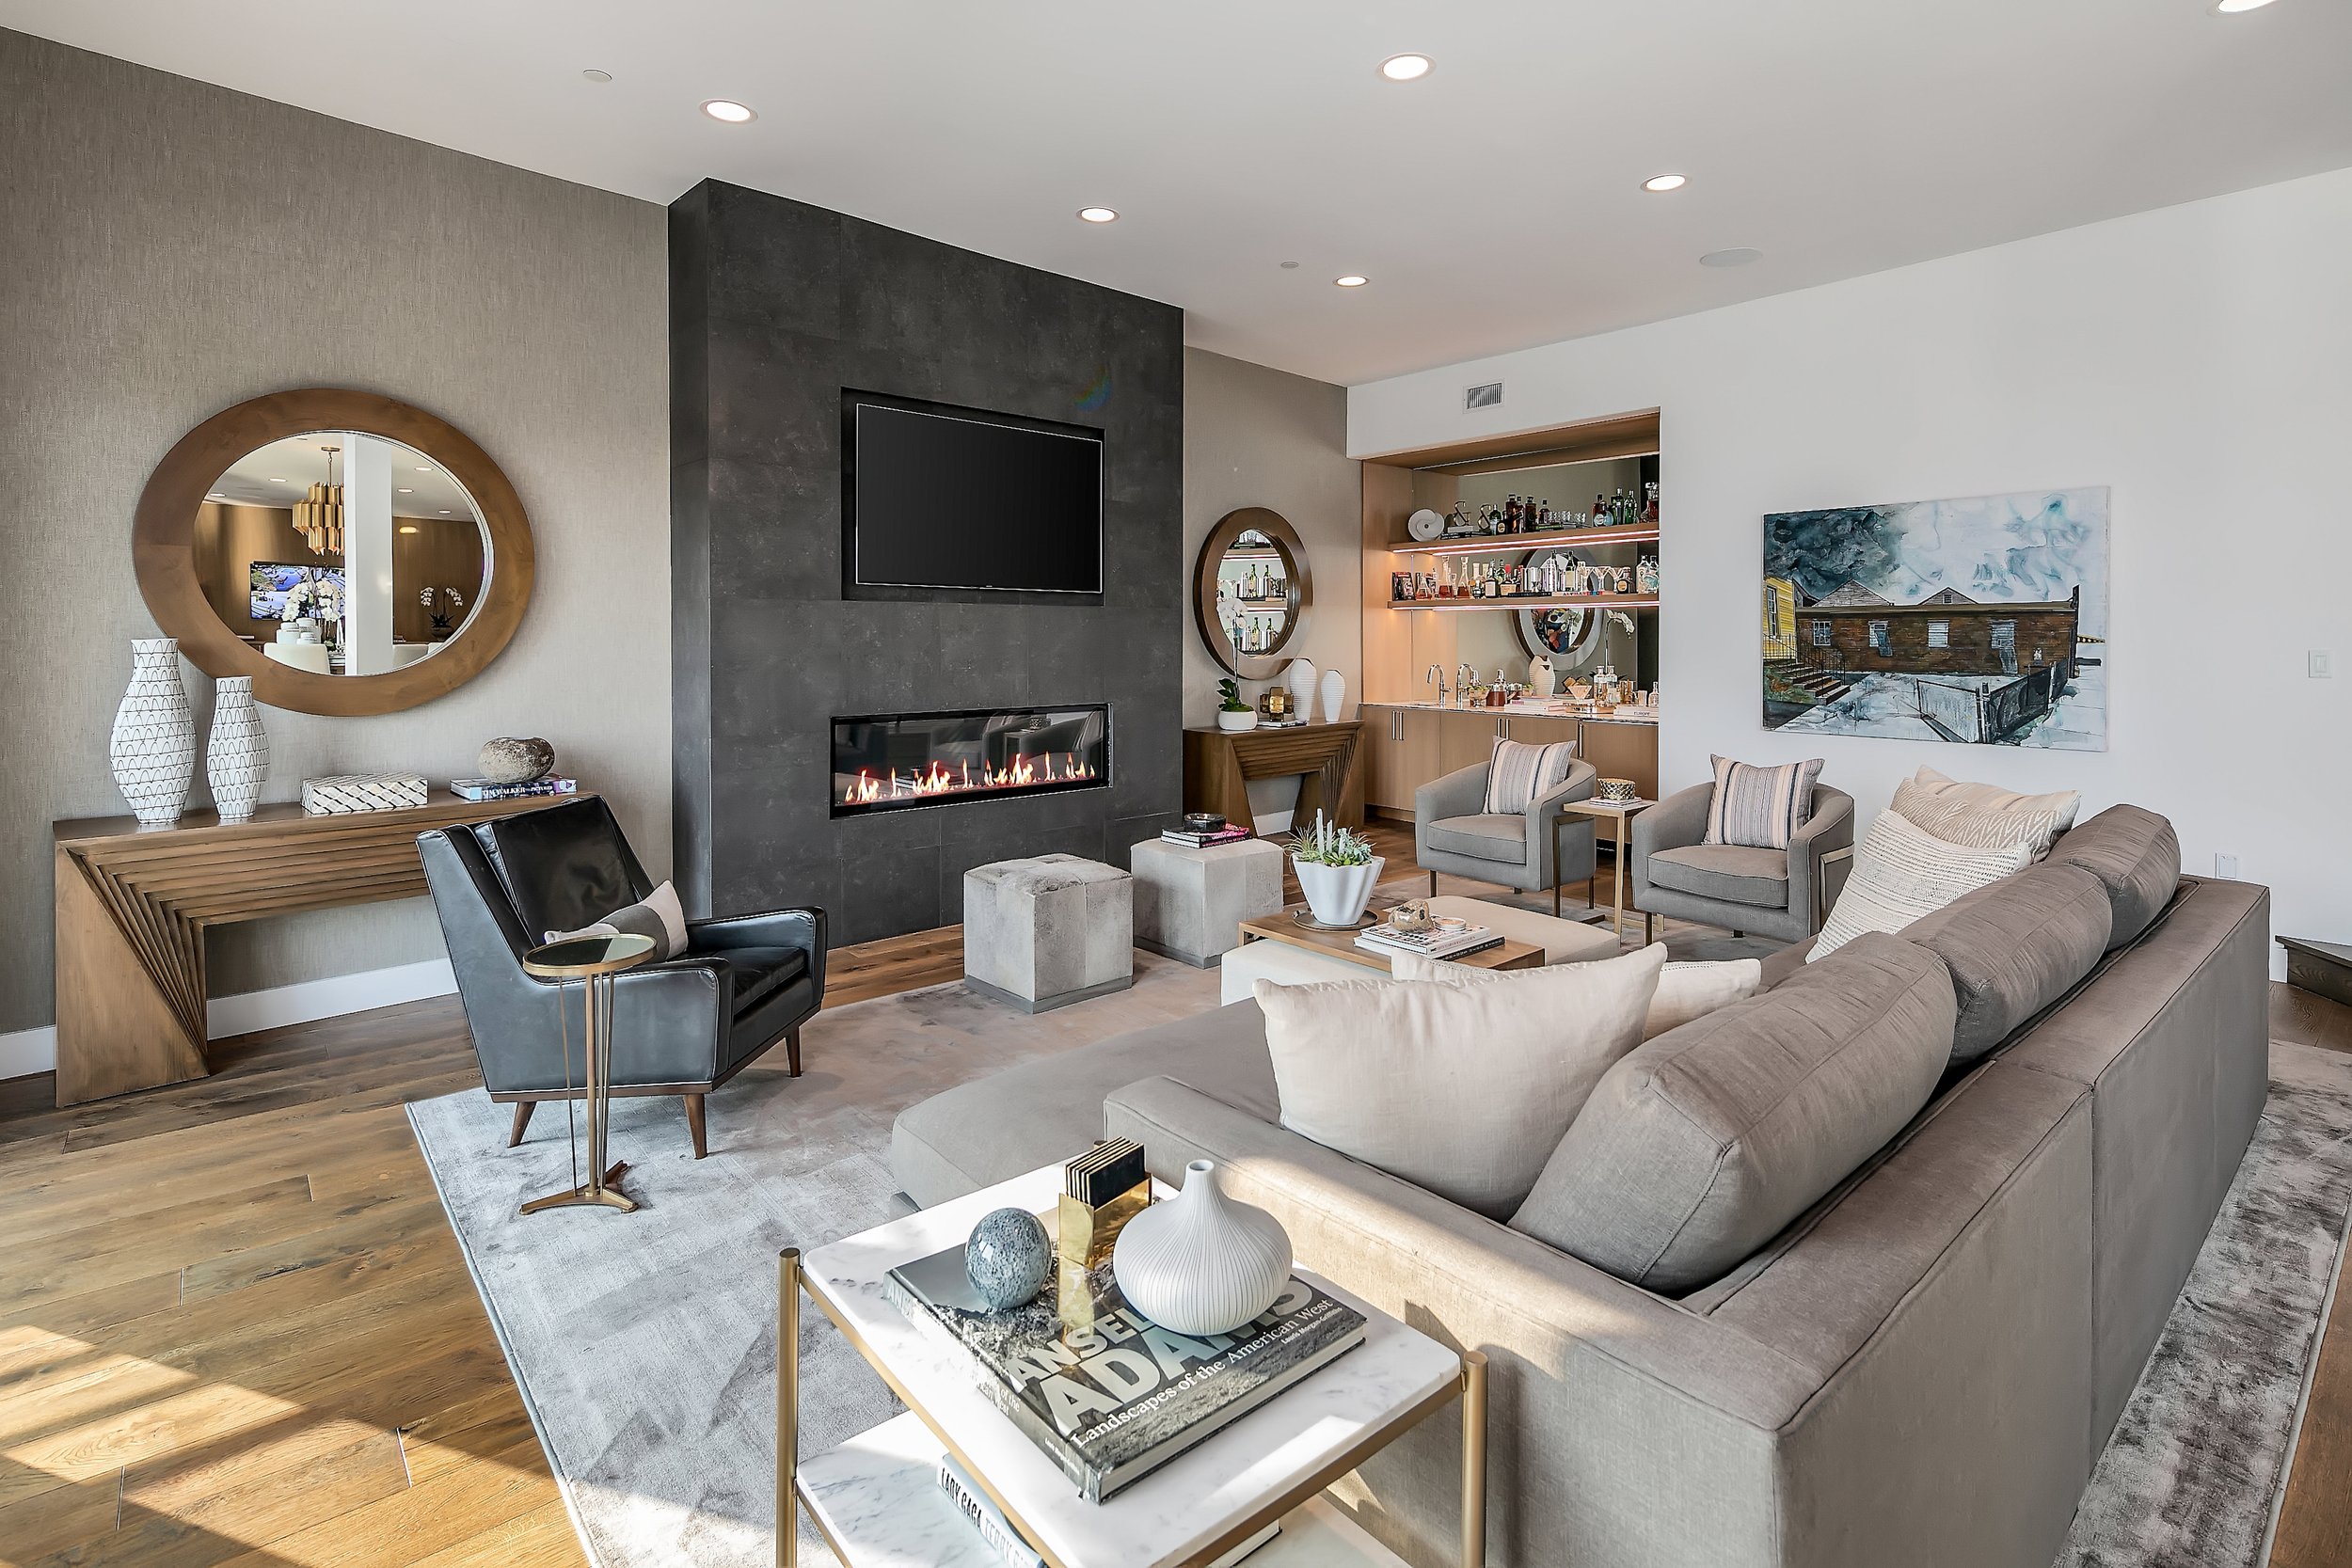  The main living area is an entertainer's dream boasting an open floor plan, high ceilings, and an abundance of natural light. From the great room with a custom wet bar, sliding glass doors open to an expansive outdoor deck allowing for quintessentia